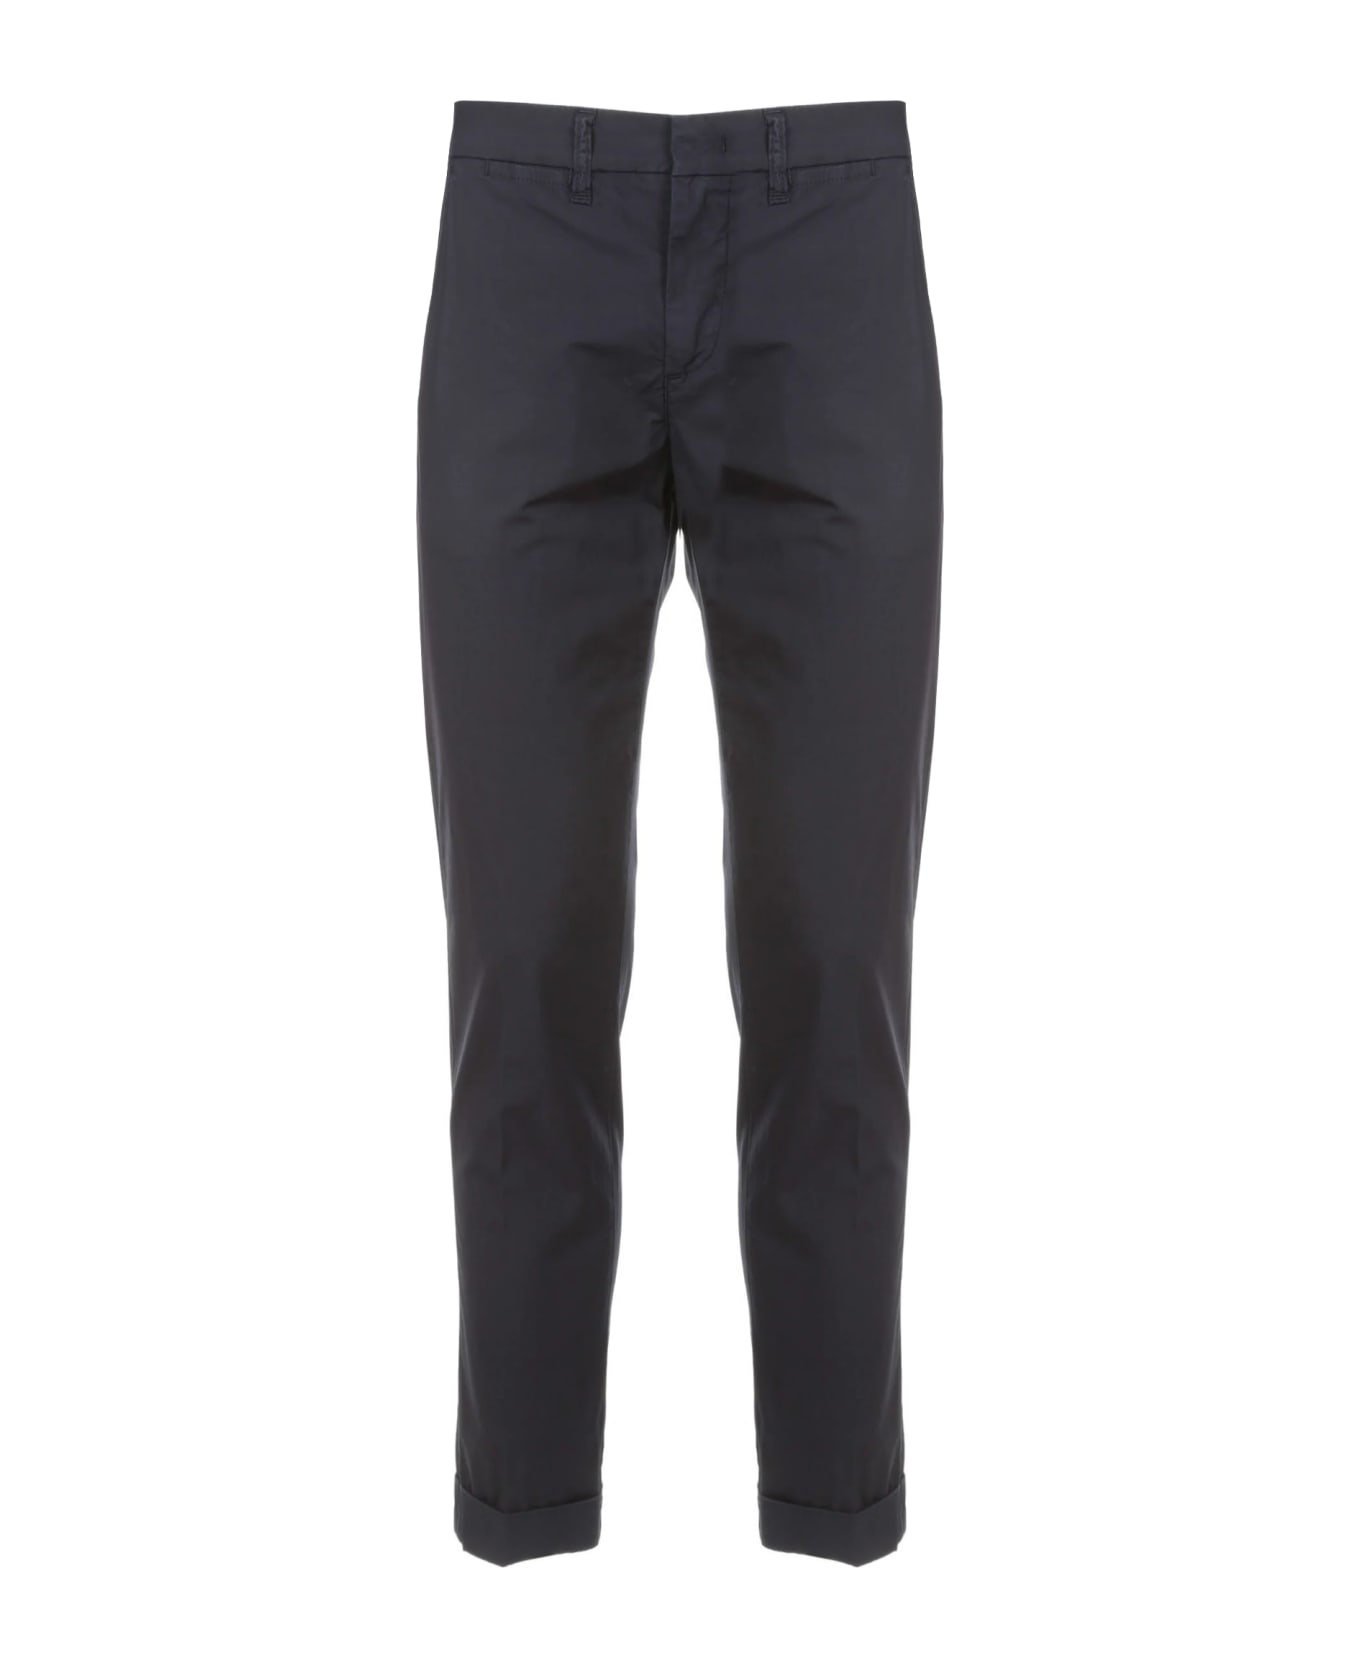 Fay Blue Cotton Stretch Trousers - NAVY